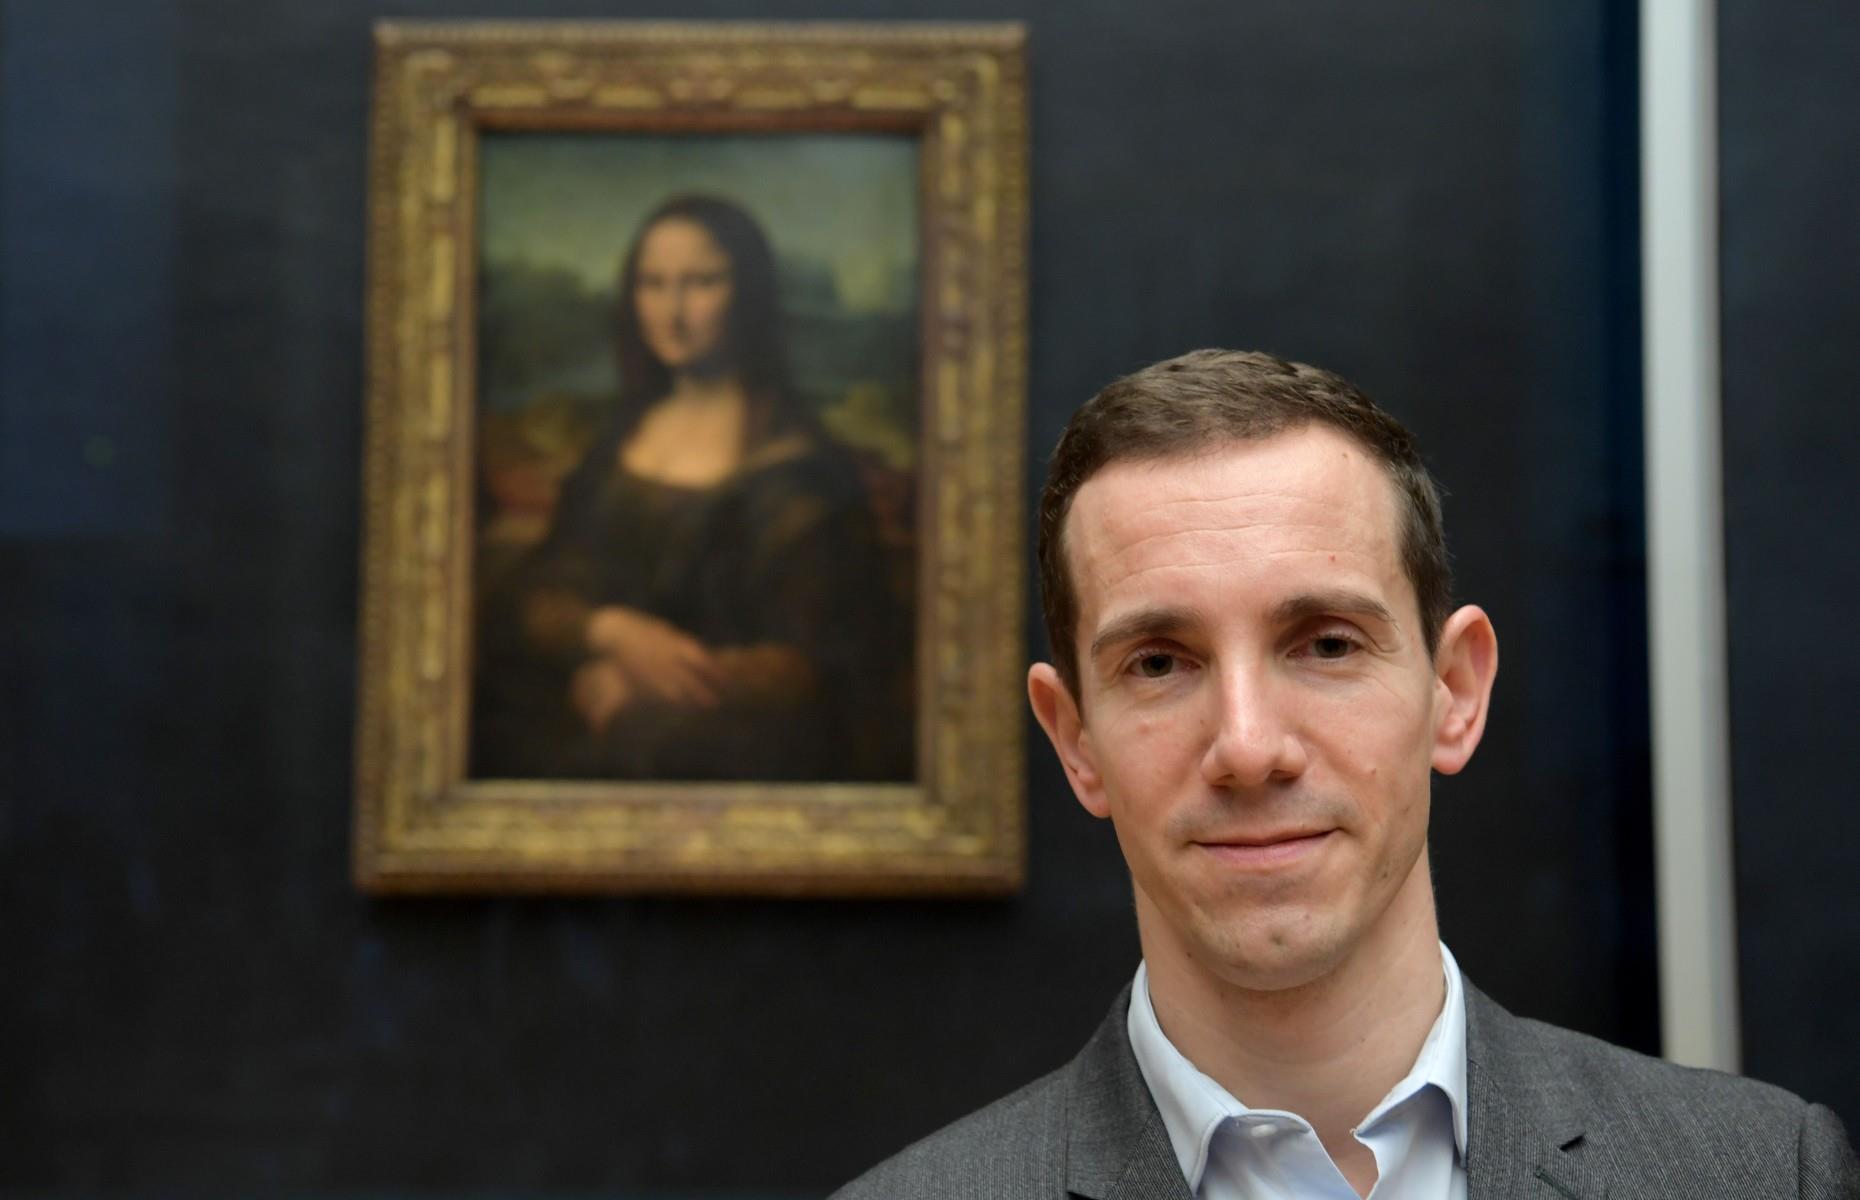 <p>A note dated October 1503 and written by da Vinci’s assistant Agostino Vespucci was discovered by a scholar at Heidelberg University in 2005. The note confirms that around that time da Vinci was indeed working on a painting of Lisa del Giocondo. In response to the discovery, Vincent Delieuvin (pictured), a Louvre representative, said "Leonardo da Vinci was painting, in 1503, the portrait of a Florentine lady by the name of Lisa del Giocondo. About this, we are now certain. Unfortunately, we cannot be absolutely certain that this portrait of Lisa del Giocondo is the painting of the Louvre."</p>